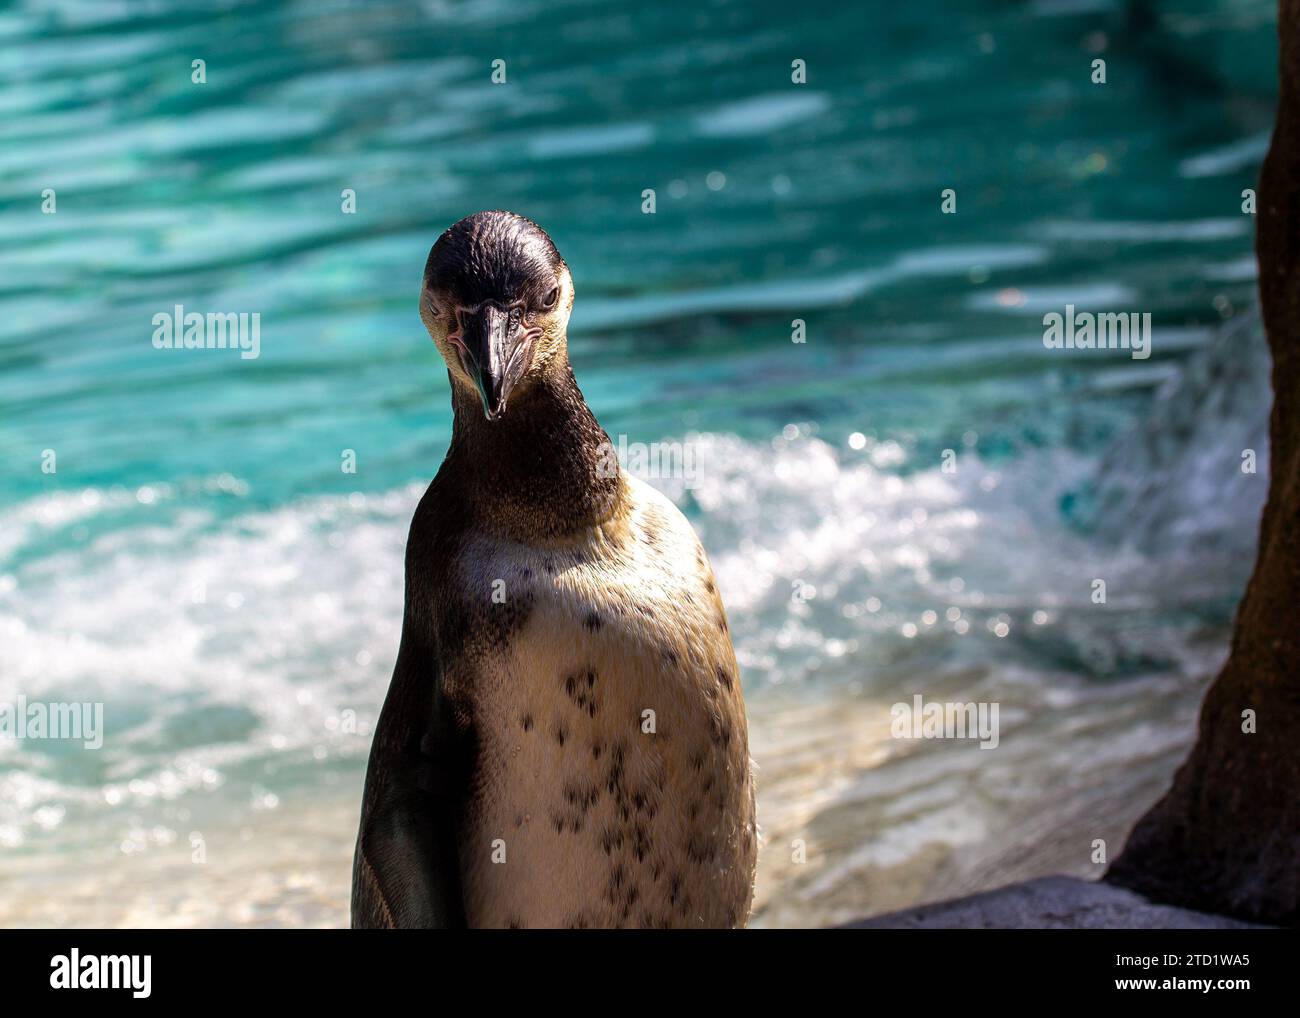 The Galapagos Penguin (Spheniscus mendiculus), native to the unique Galapagos Islands, thrives near the equator. This small, resilient penguin species Stock Photo